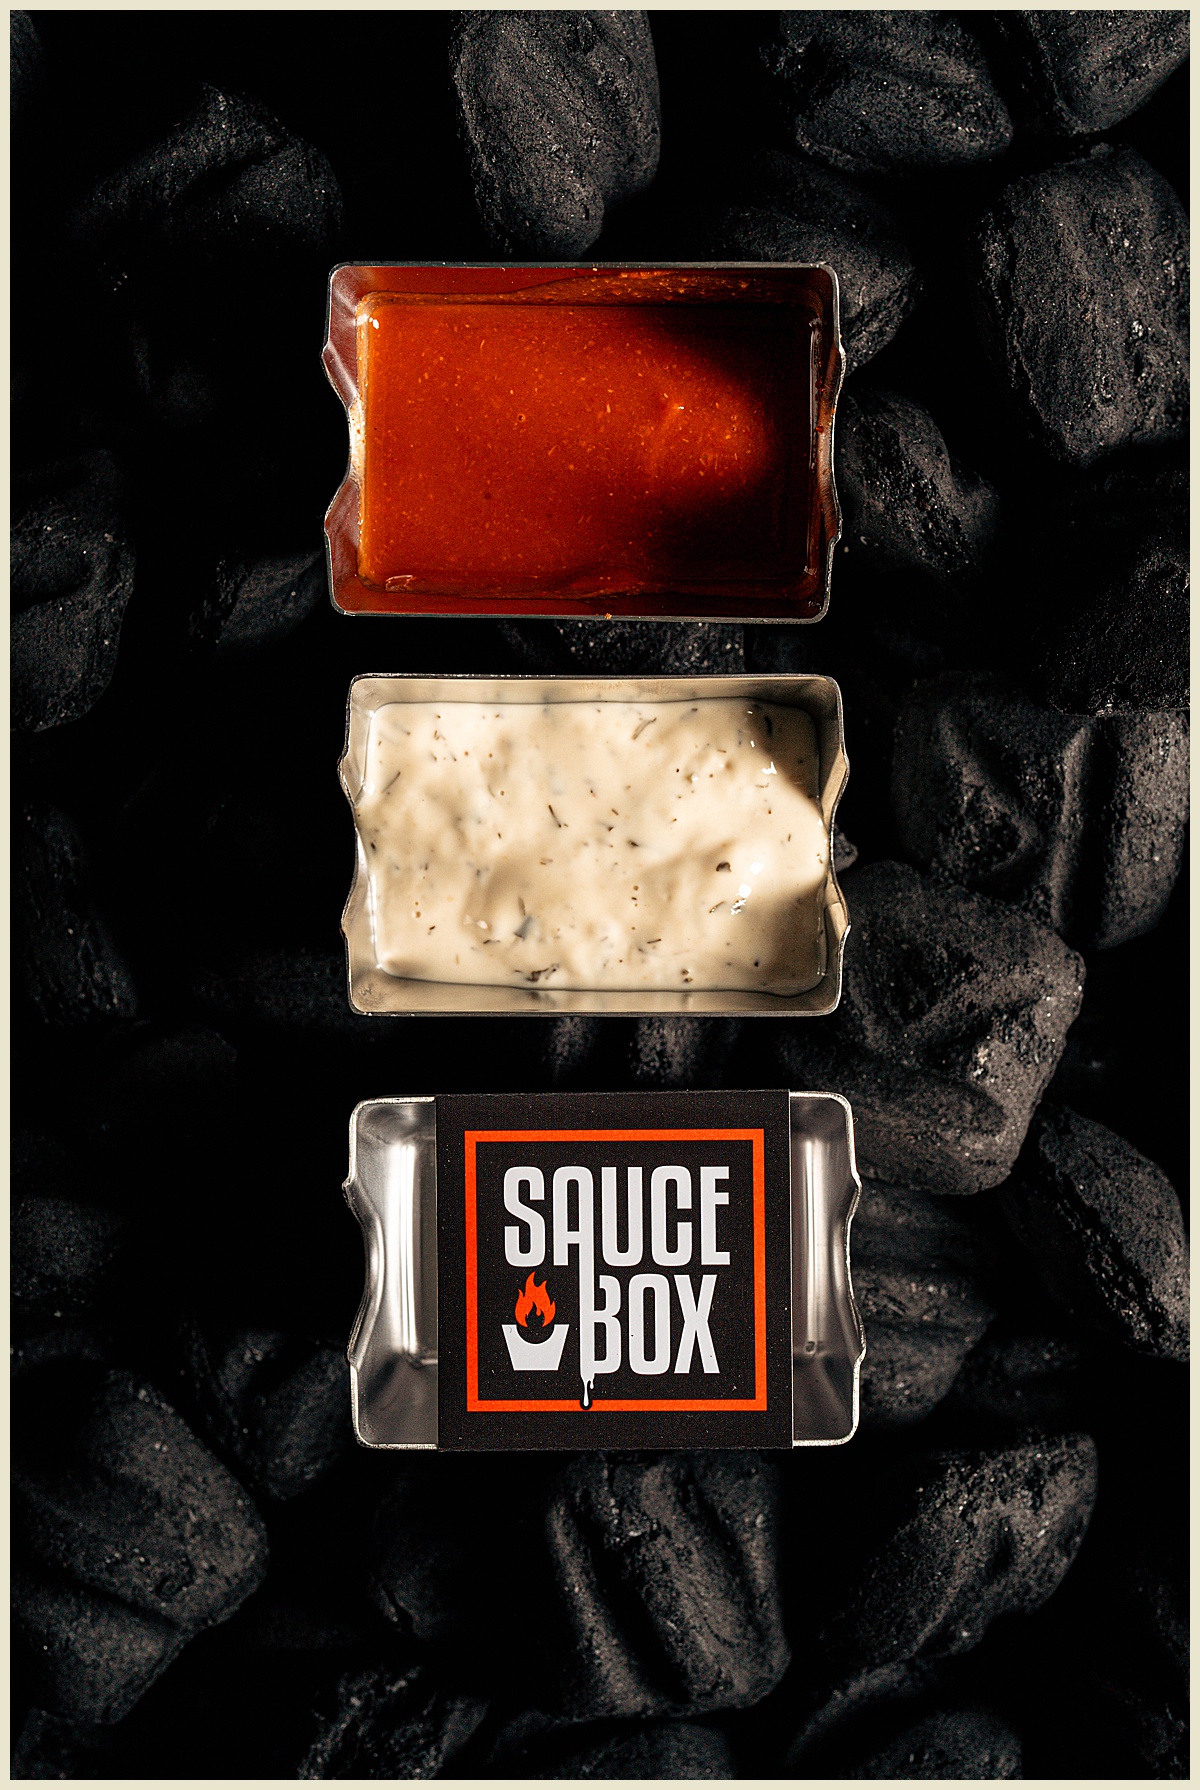 Greenville, South Carolina commercial photographer featuring Sauce Box wing caddy photo over charcoal.